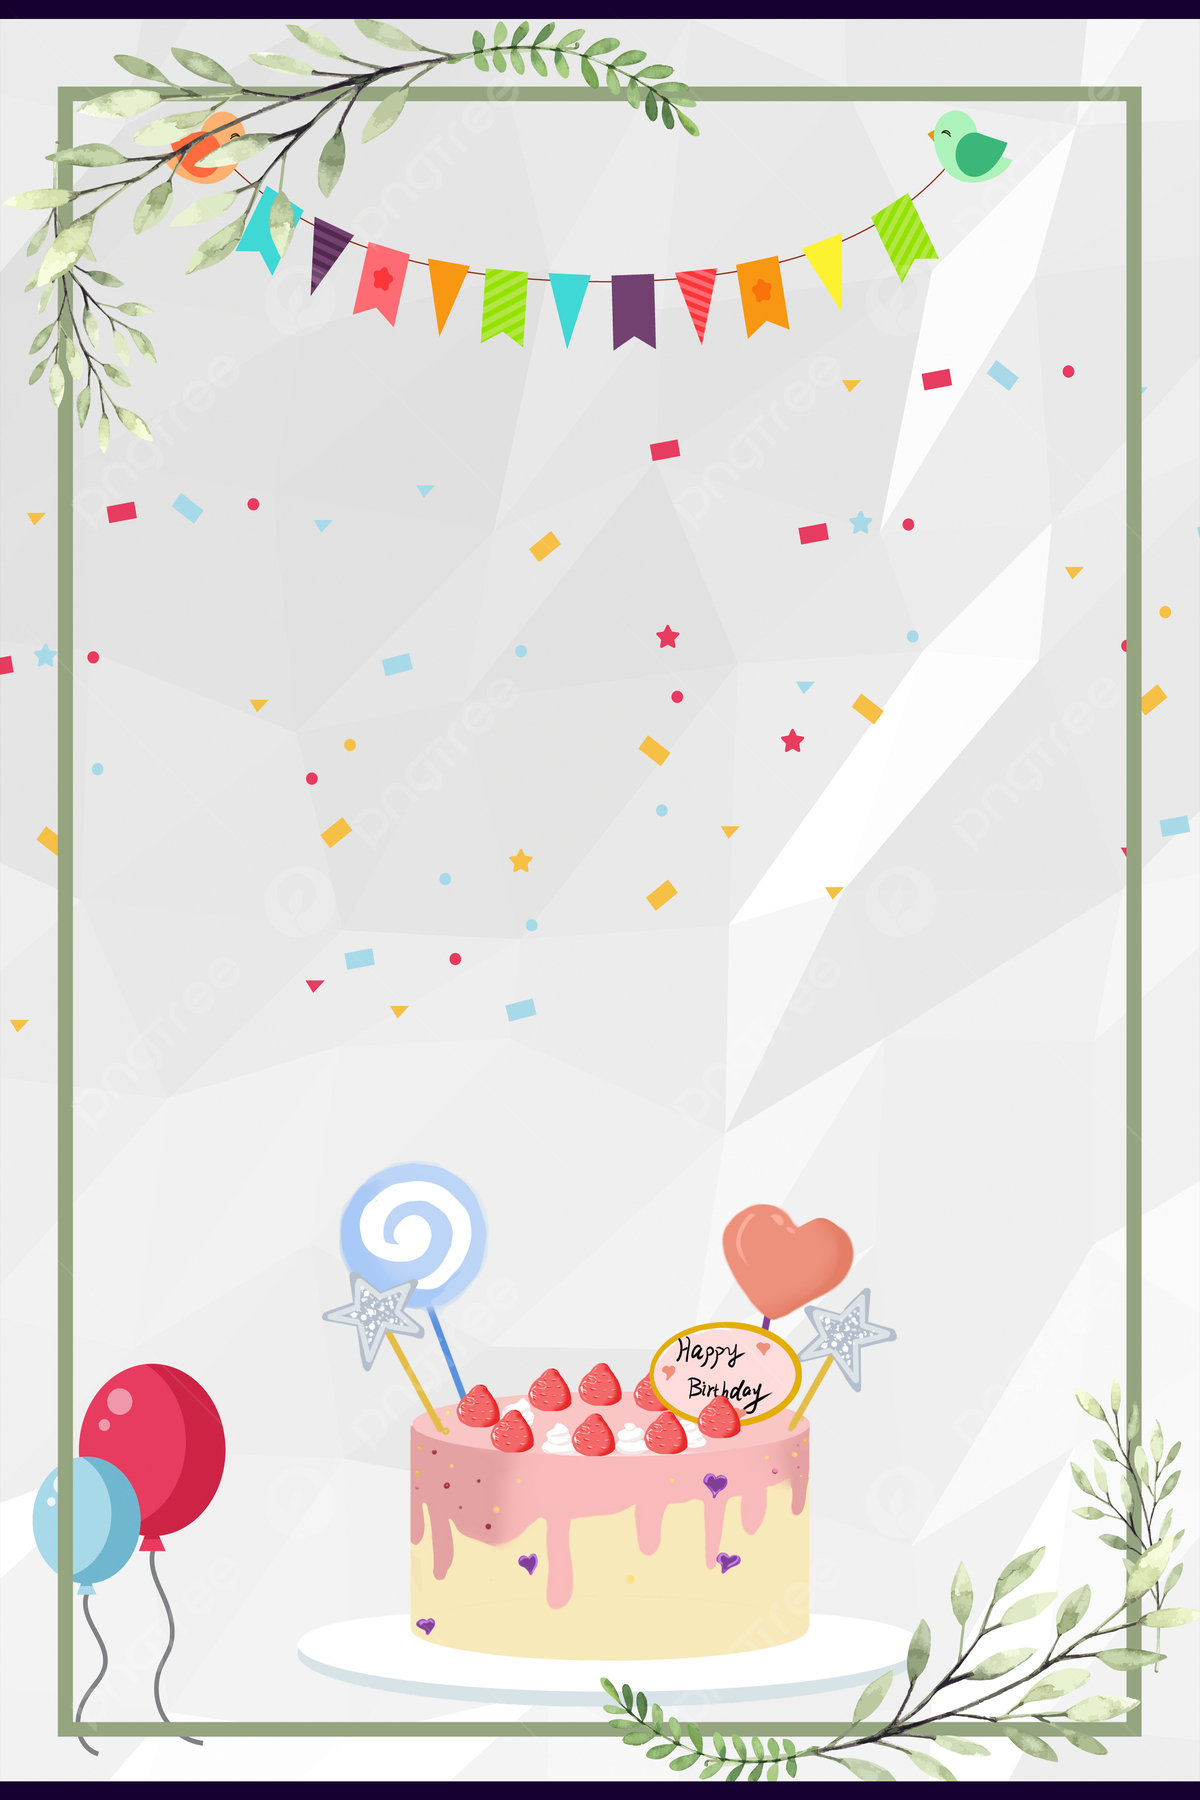 Cartoon Happy Birthday Poster Background Template Wallpaper Image - Make Birthday Posters Online Free Printable